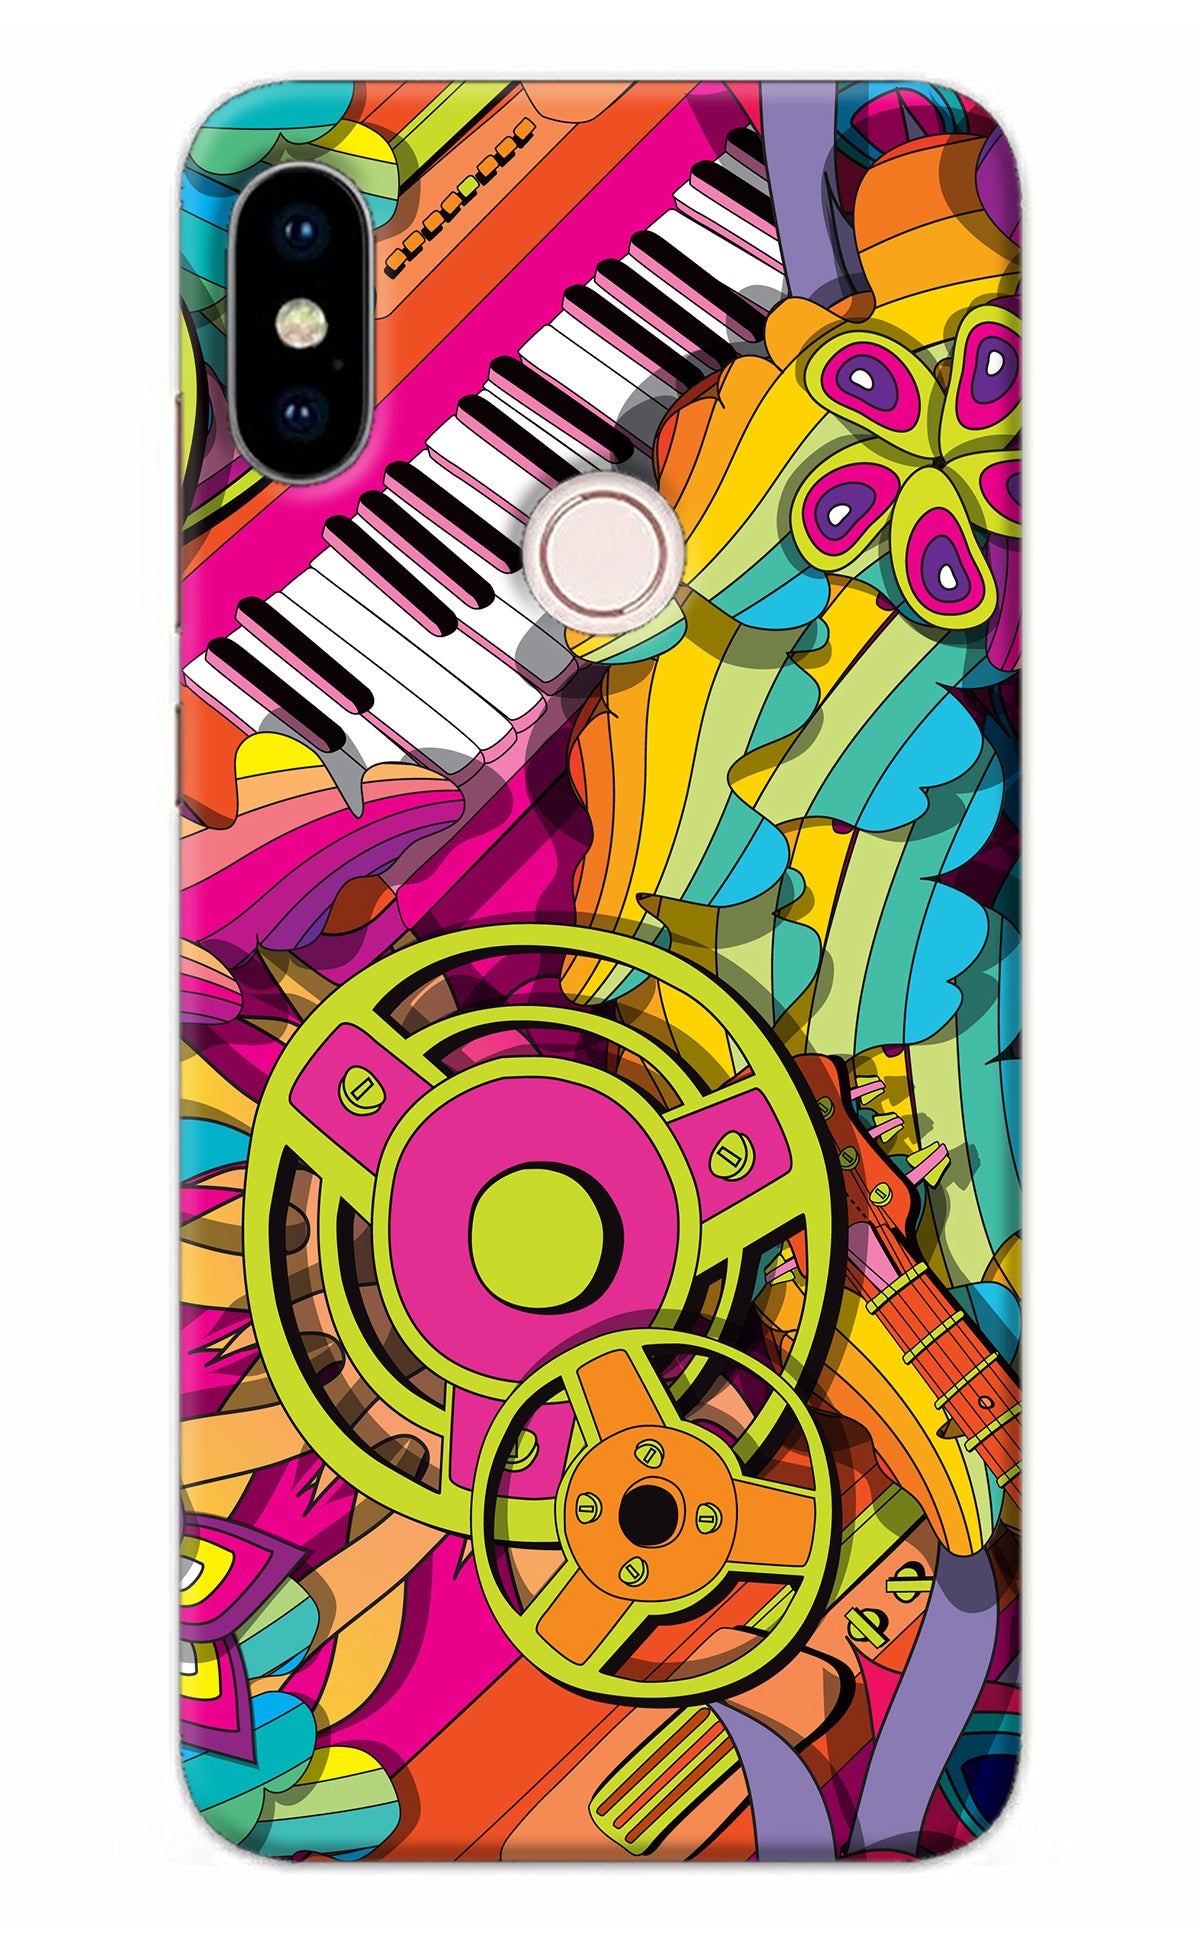 Music Doodle Redmi Note 5 Pro Back Cover